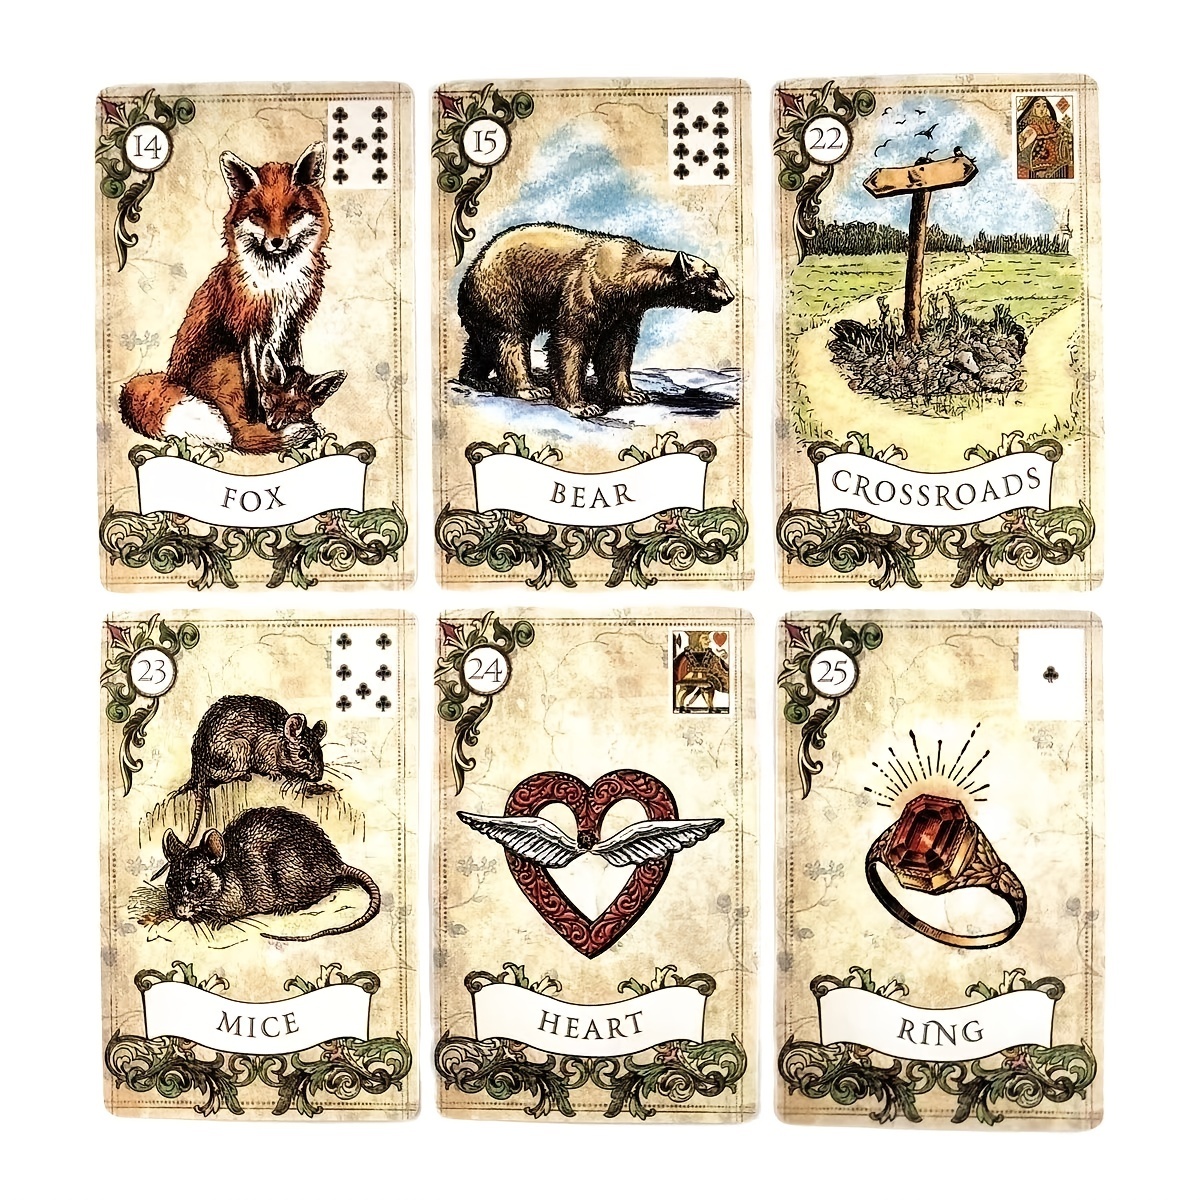 Vintage Lenormand Tarot Deck: An Oracle of Fortune Telling and Board Games